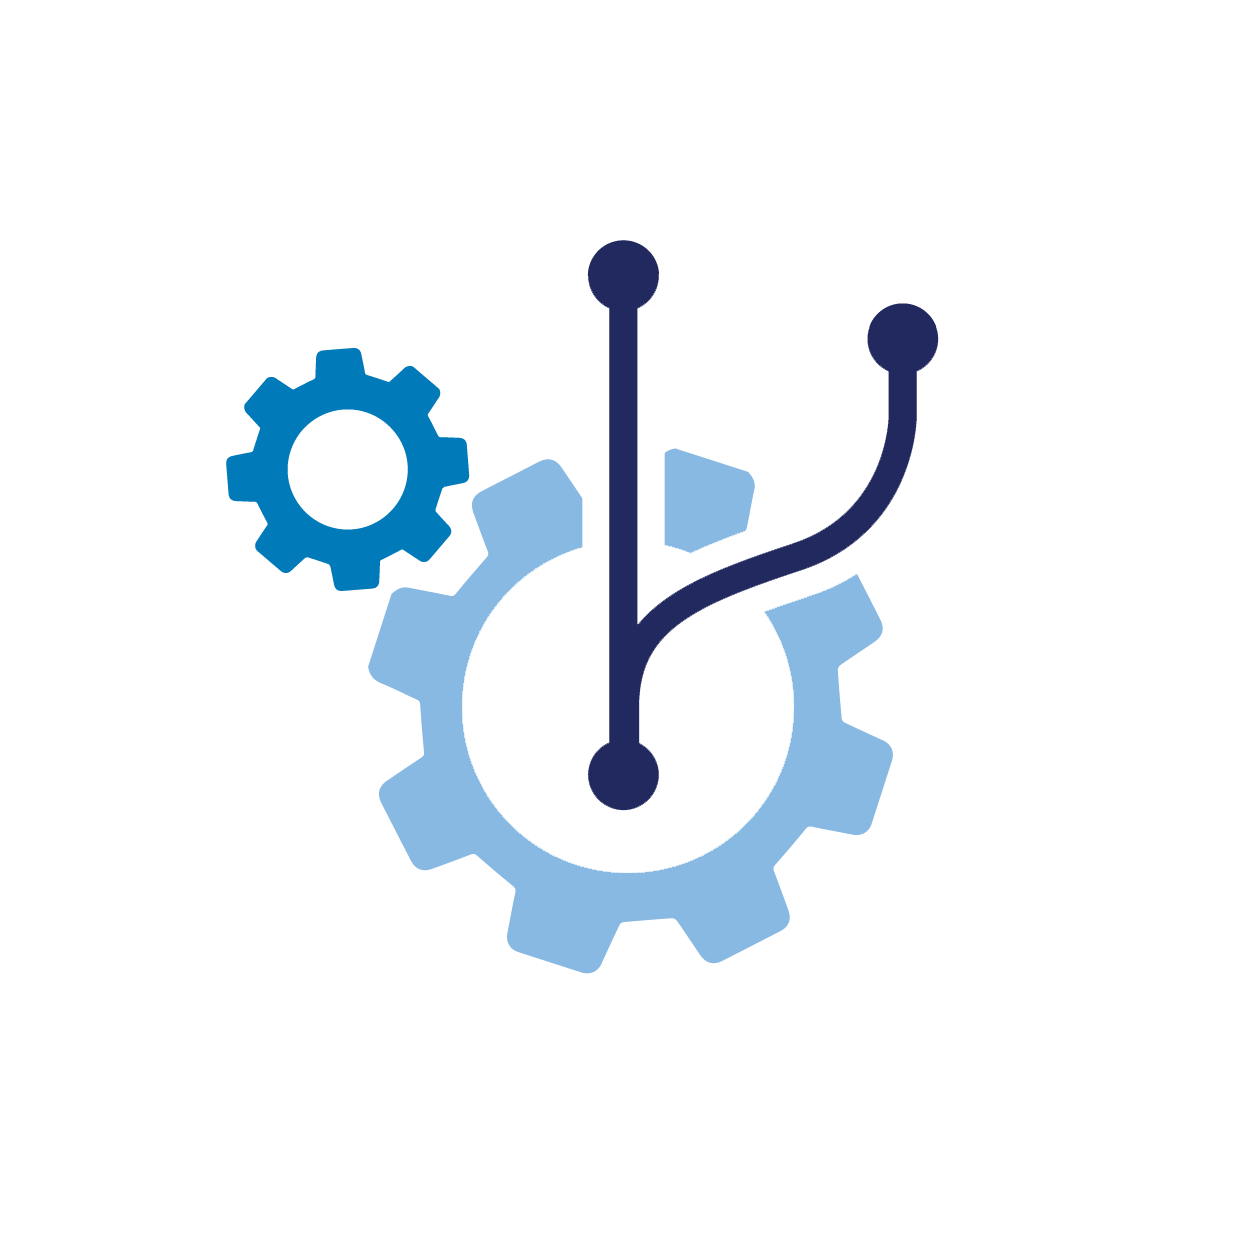 icon style image of 2 gears and tech lines to depict synergy